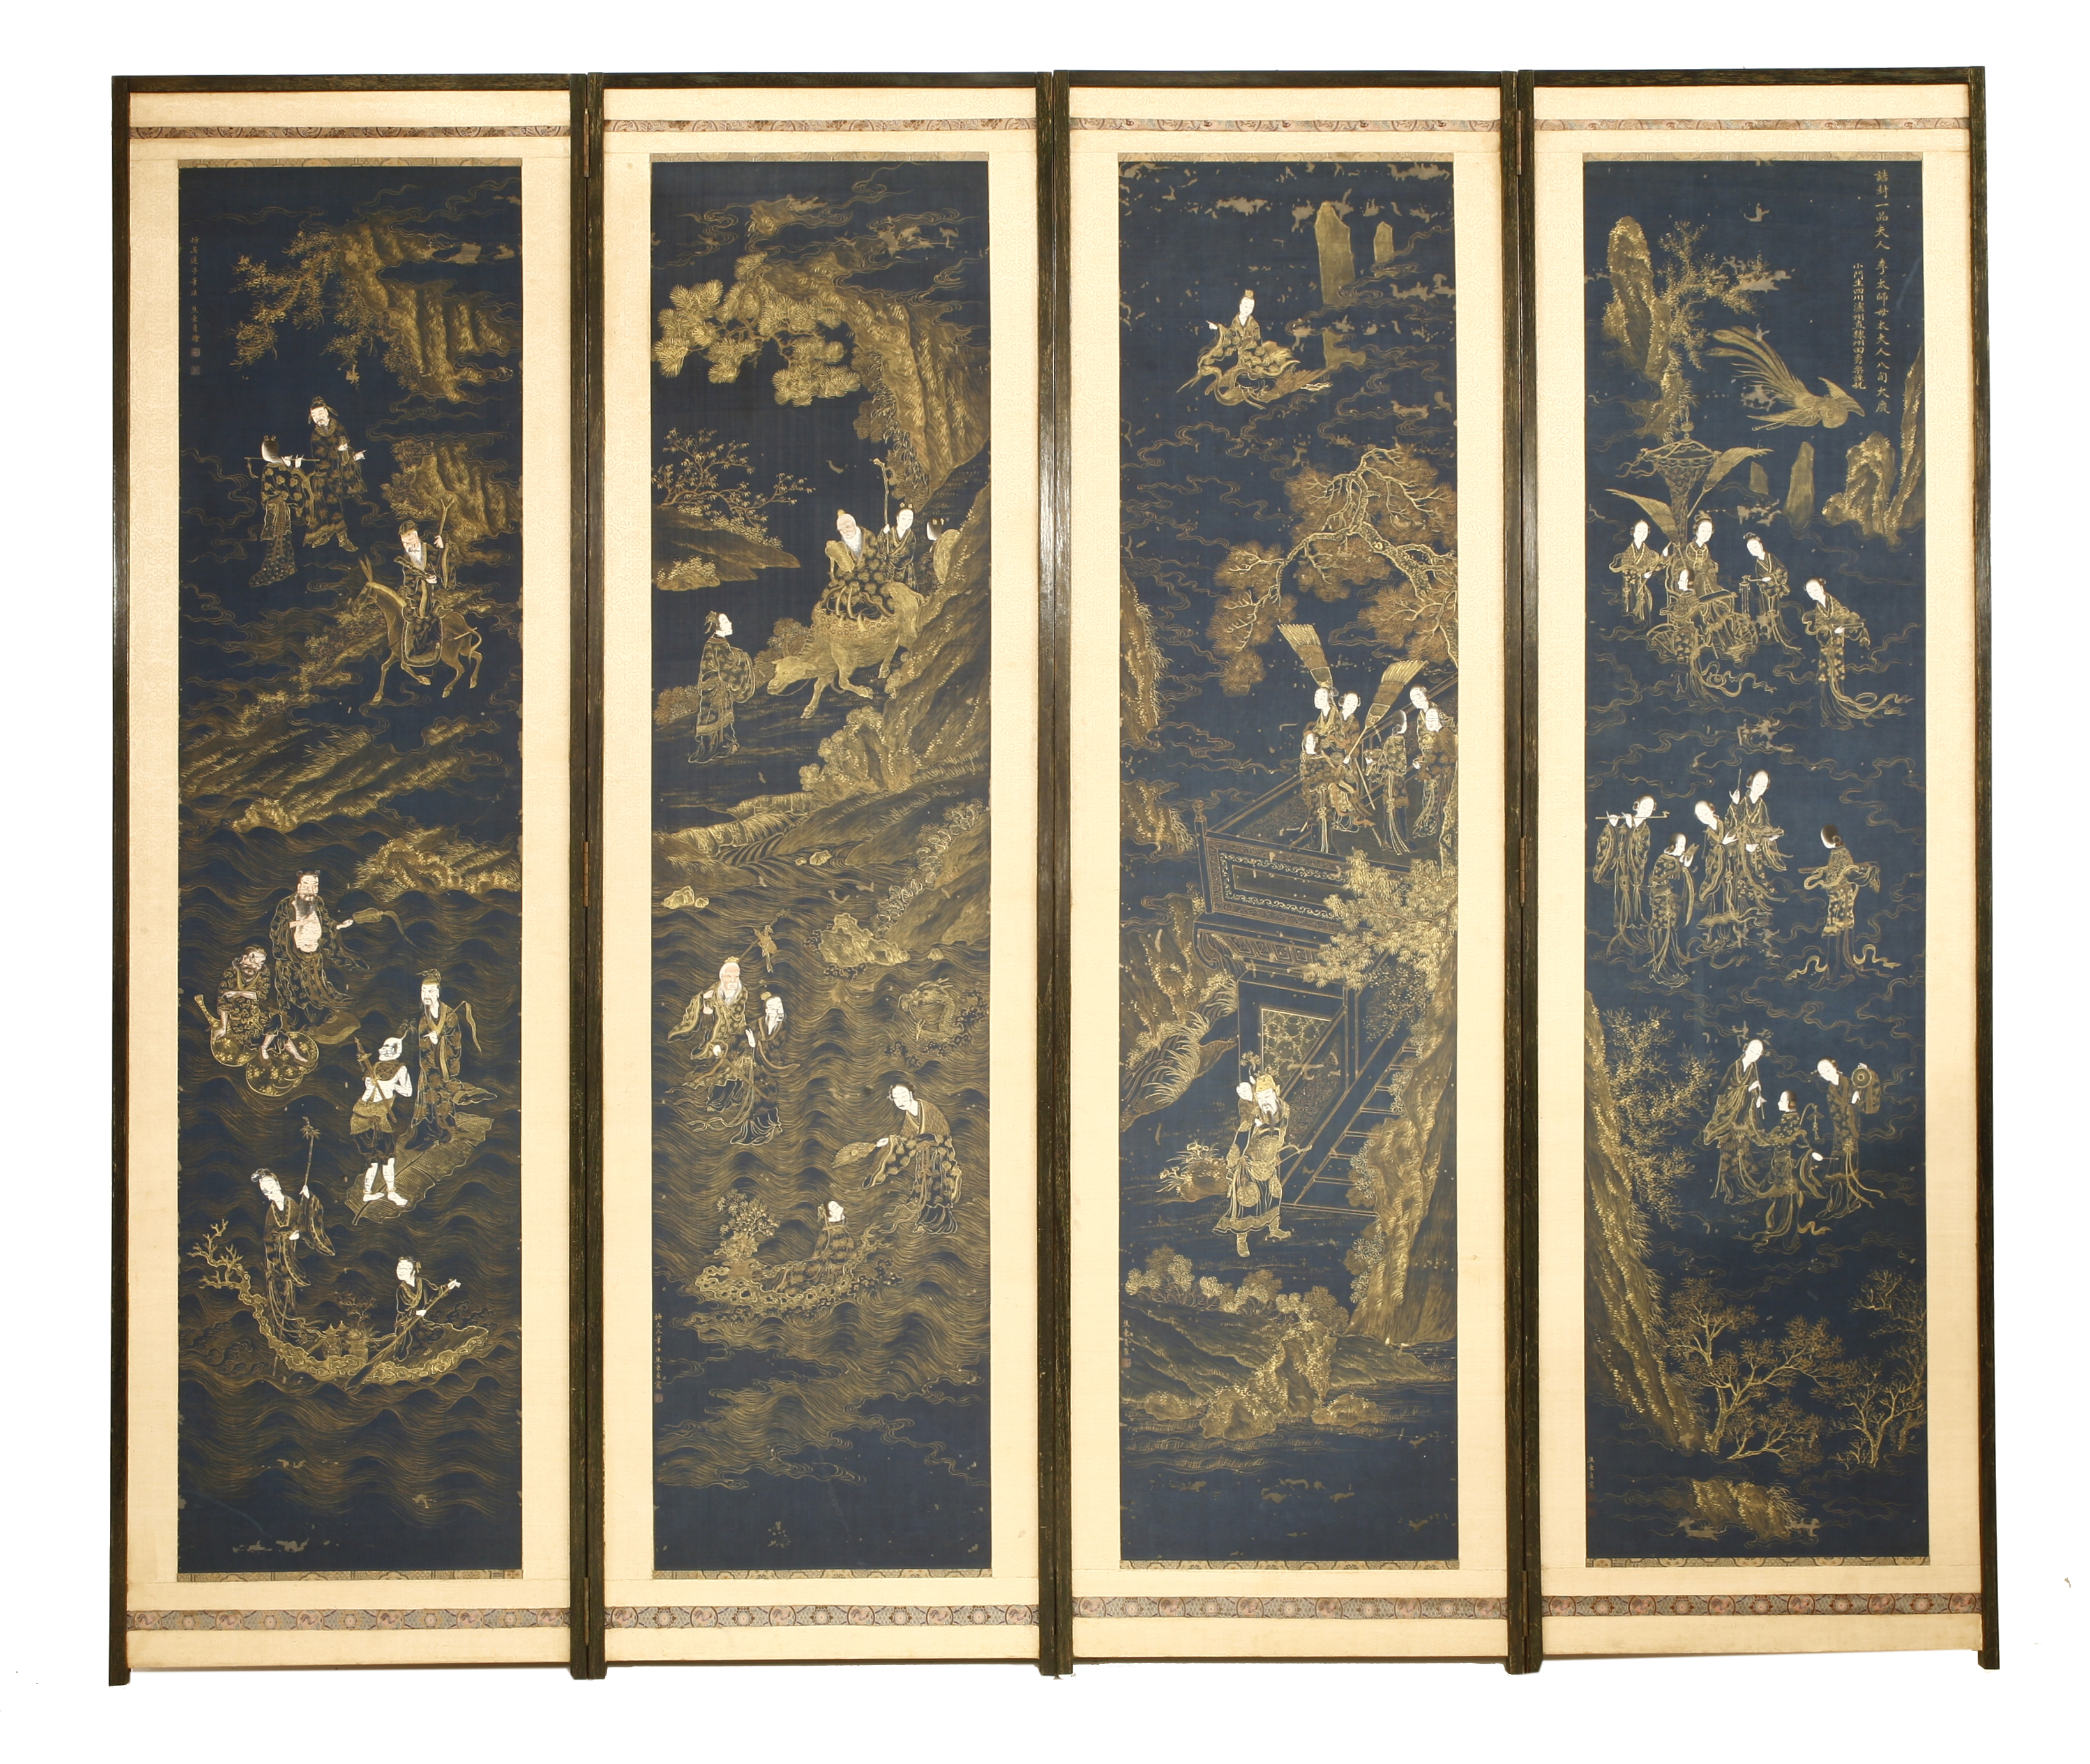 A Chinese four-fold screen,18th century, the hanging scrolls painted with Eight Daoist Immortals and other deities celebrating the birthday of Queen Mother of the West